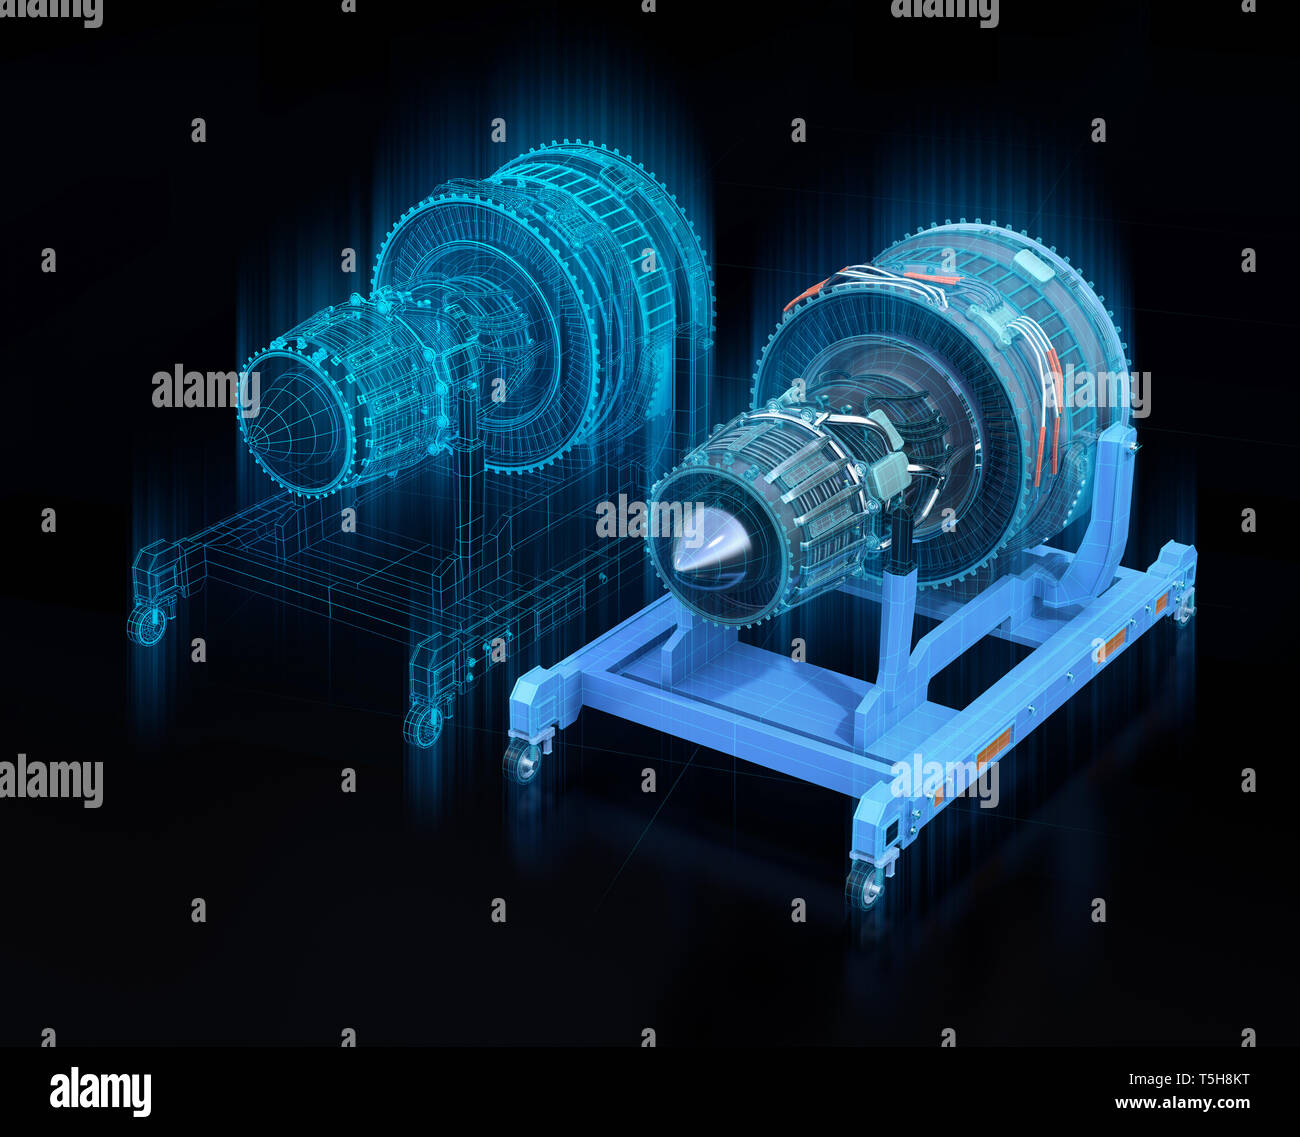 Wireframe rendering of turbojet engine and mirrored physical body on black background. Digital twin concept. 3D rendering image. Stock Photo